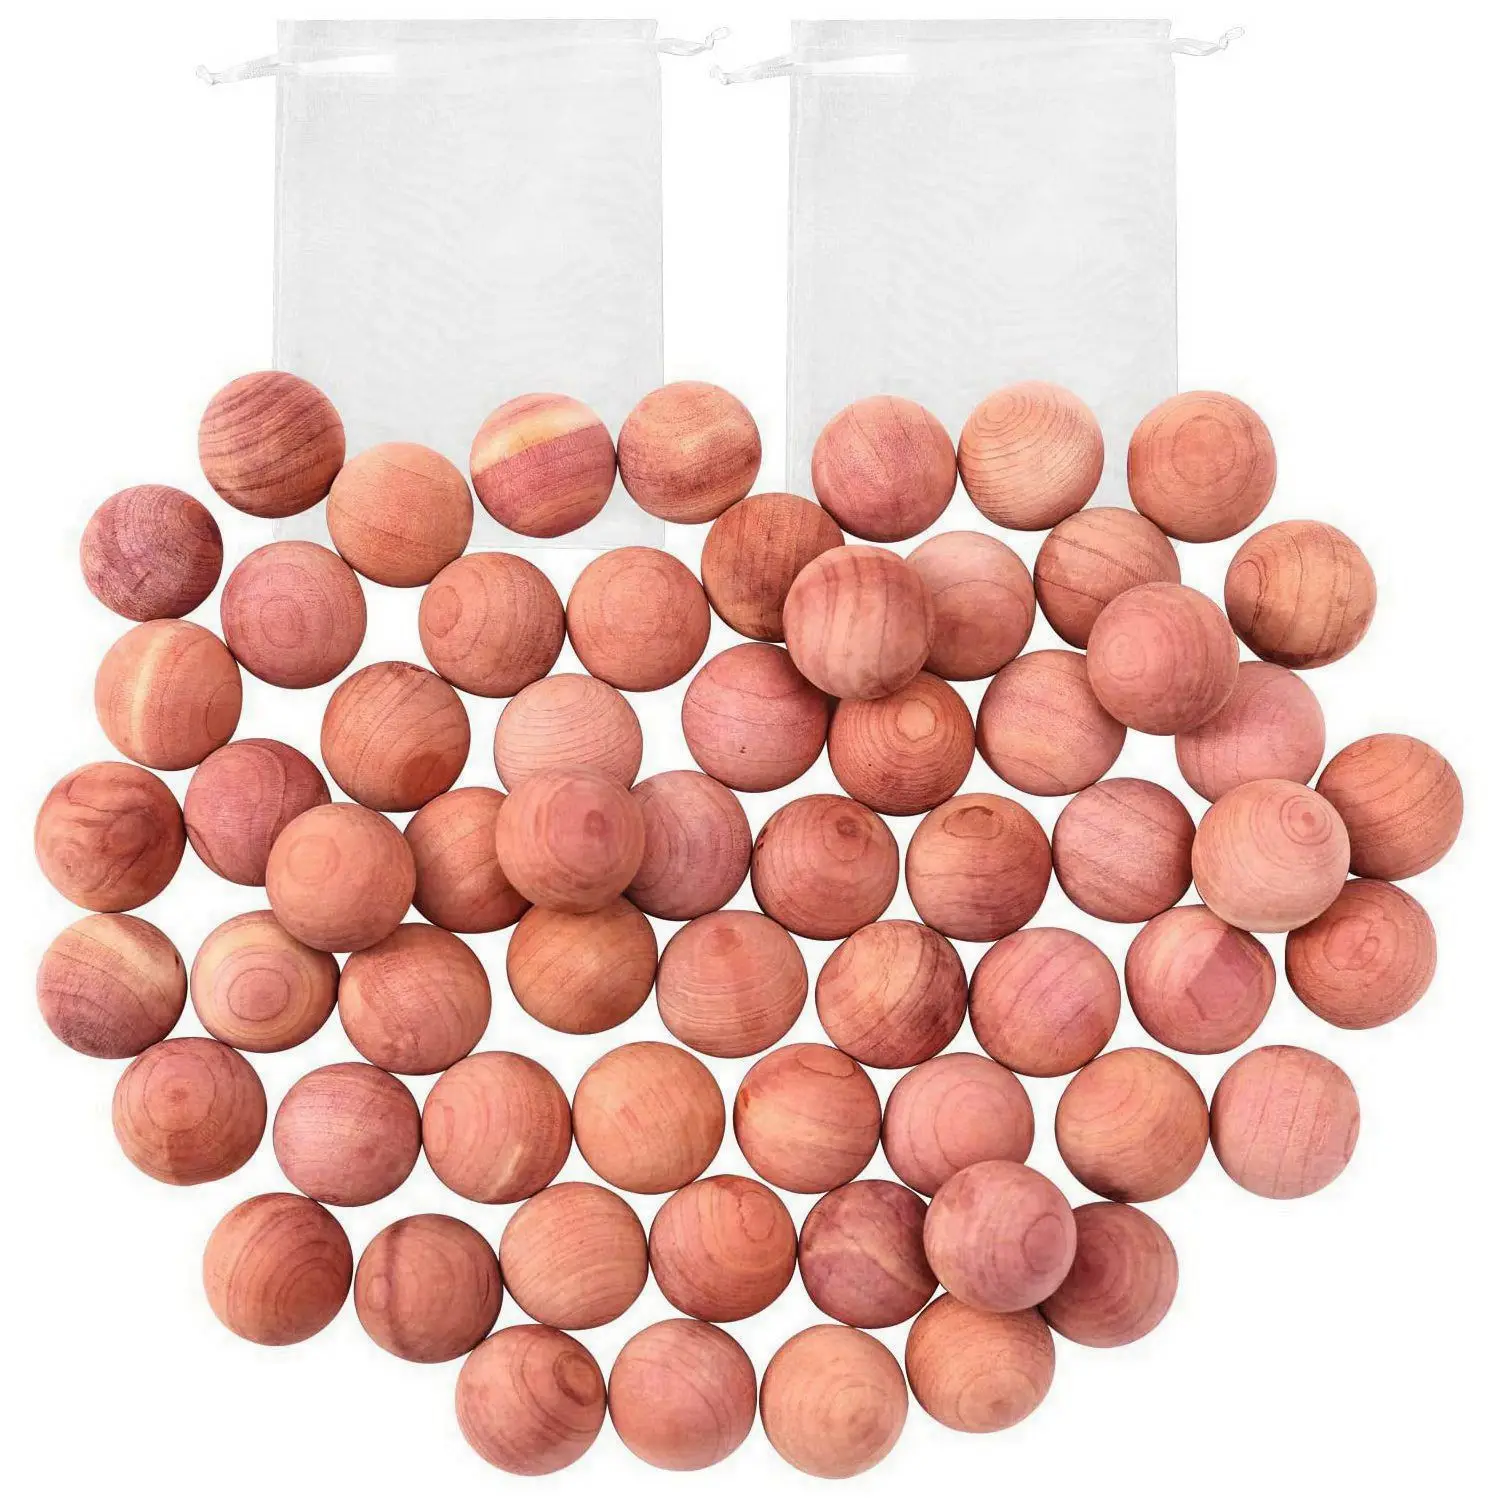 

Cedar Balls for Closets and Drawers Natural Cedar Balls for Clothes Storage 48PCs with 2 Satin Bags